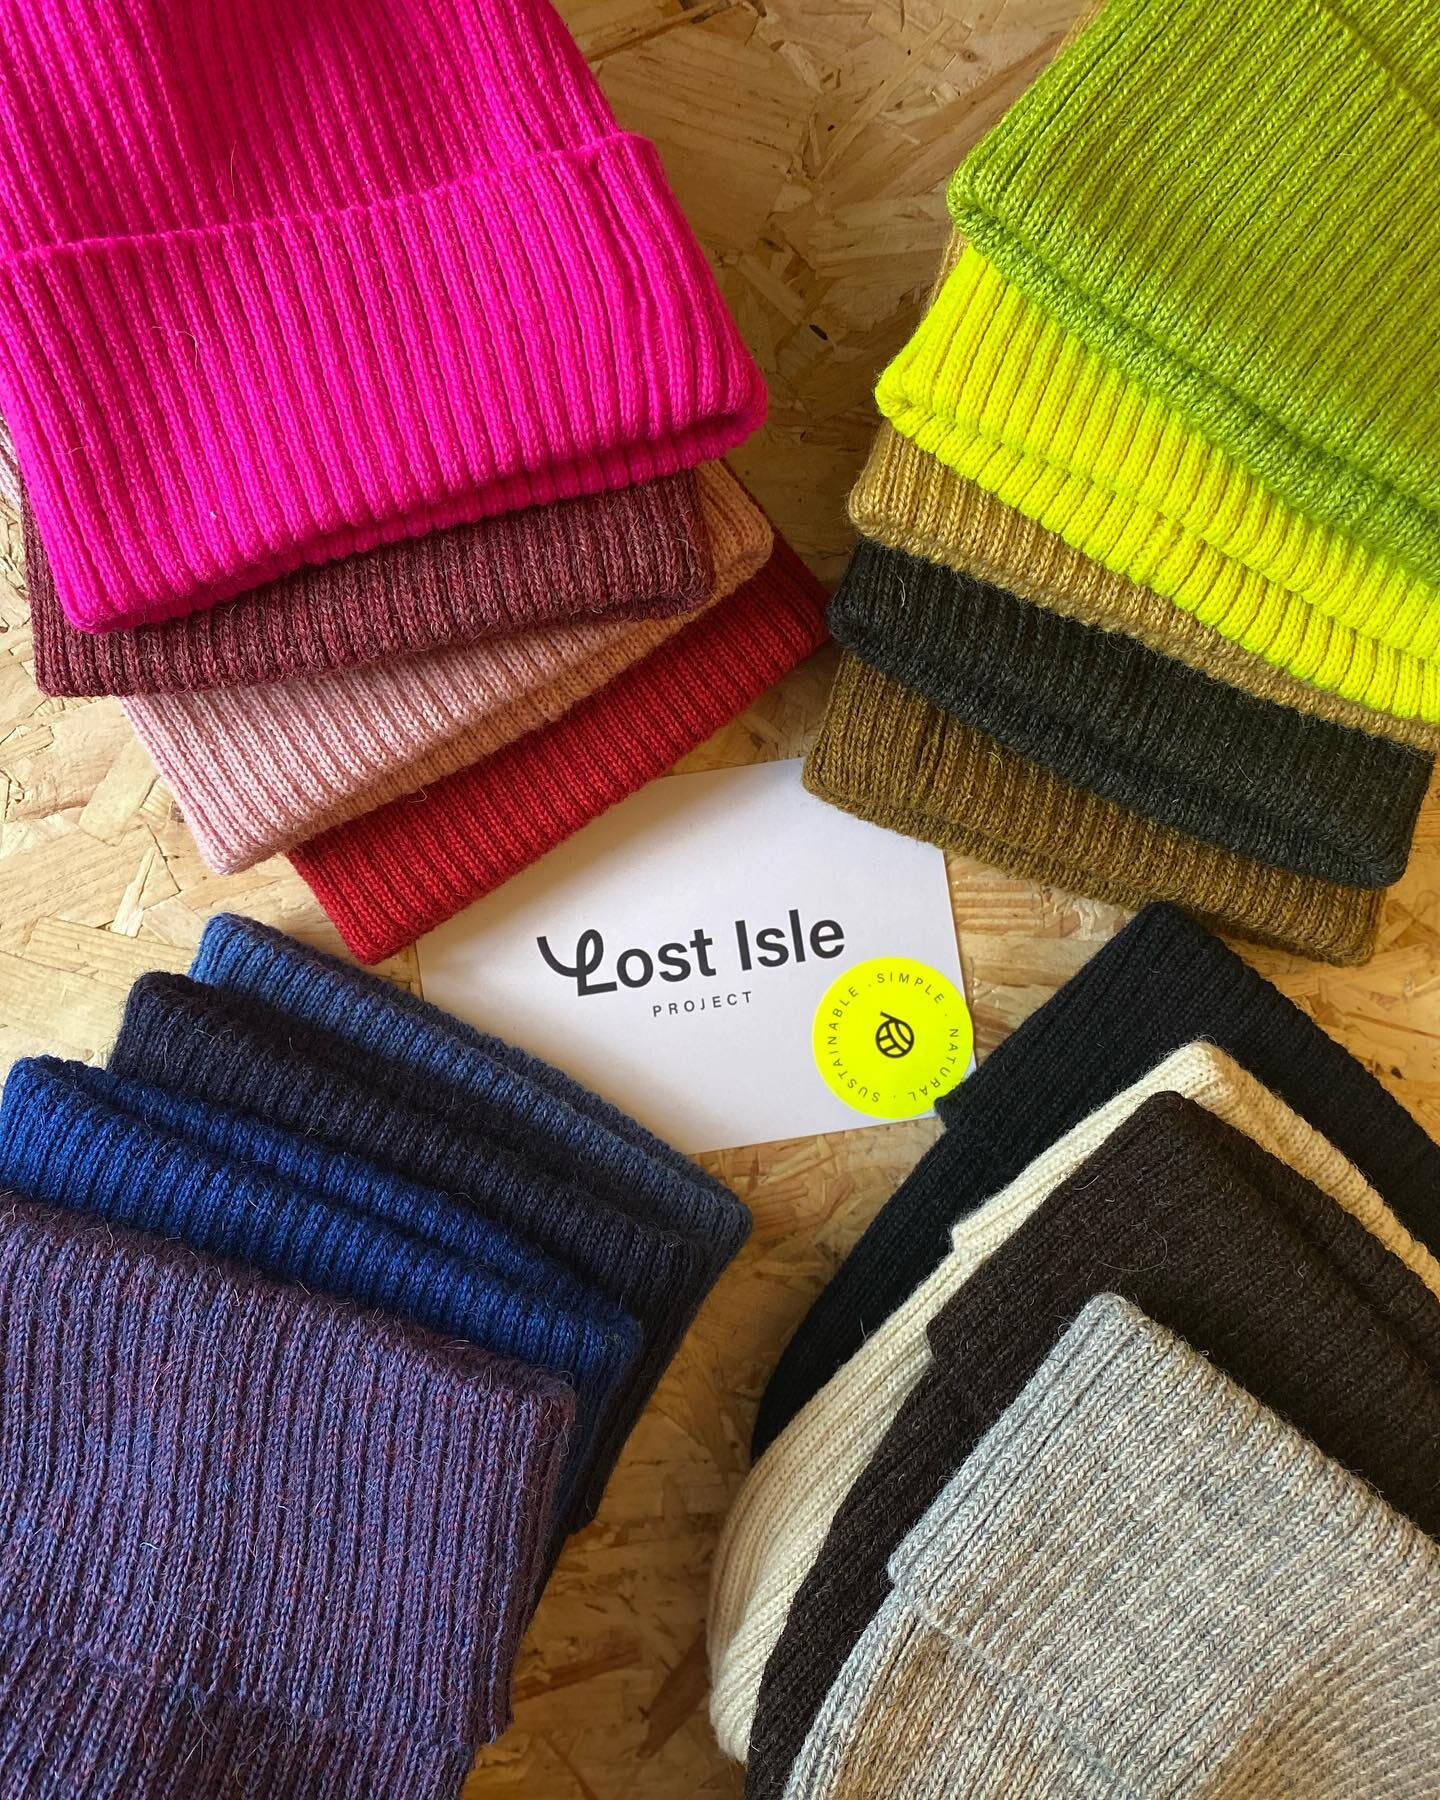 All the colour.
❤️💖🐑🧡💛💚💜🤍🤎🖤

Did you know that you can shop by colour or style on our website? 

Choose from the Red Ones, the Blues Ones, the Yellow Ones, the Green Ones, the Natural Ones or the Pink Ones.

We know you love the Chunky Knit 